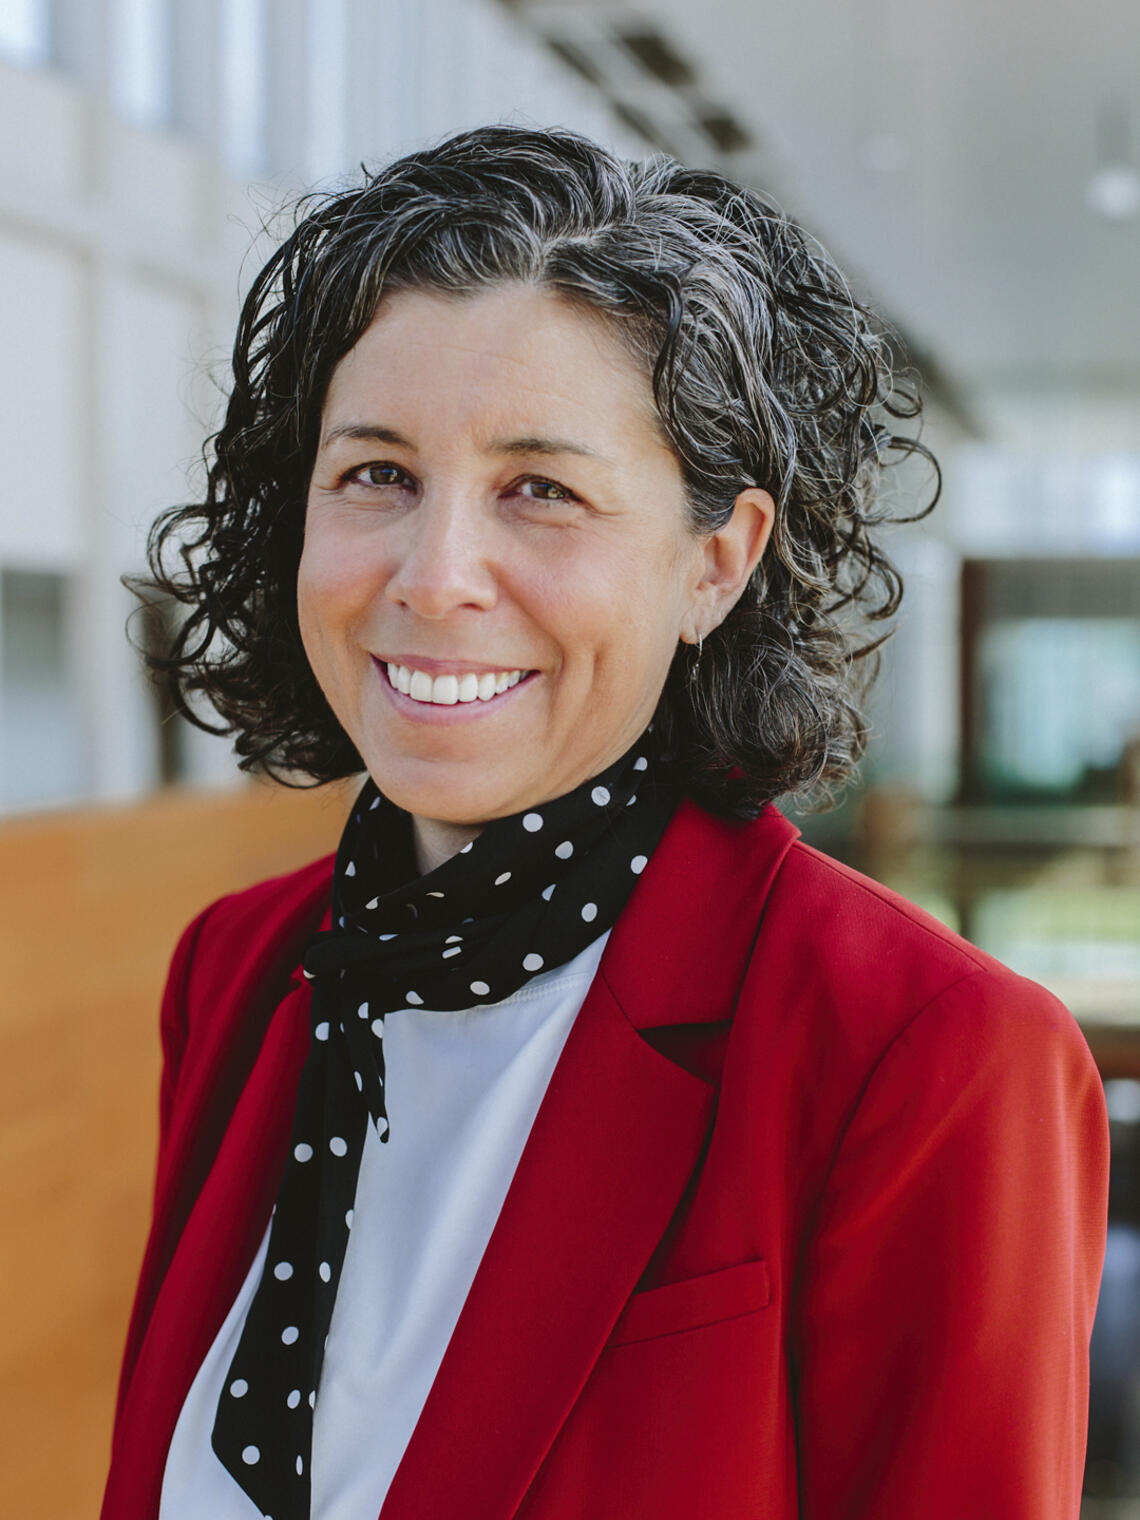 Leslie Reid, a white woman with dark curly hair, wearing a red blazer and a scarf, smiles inside the Taylor Institute for Teaching and Learning.